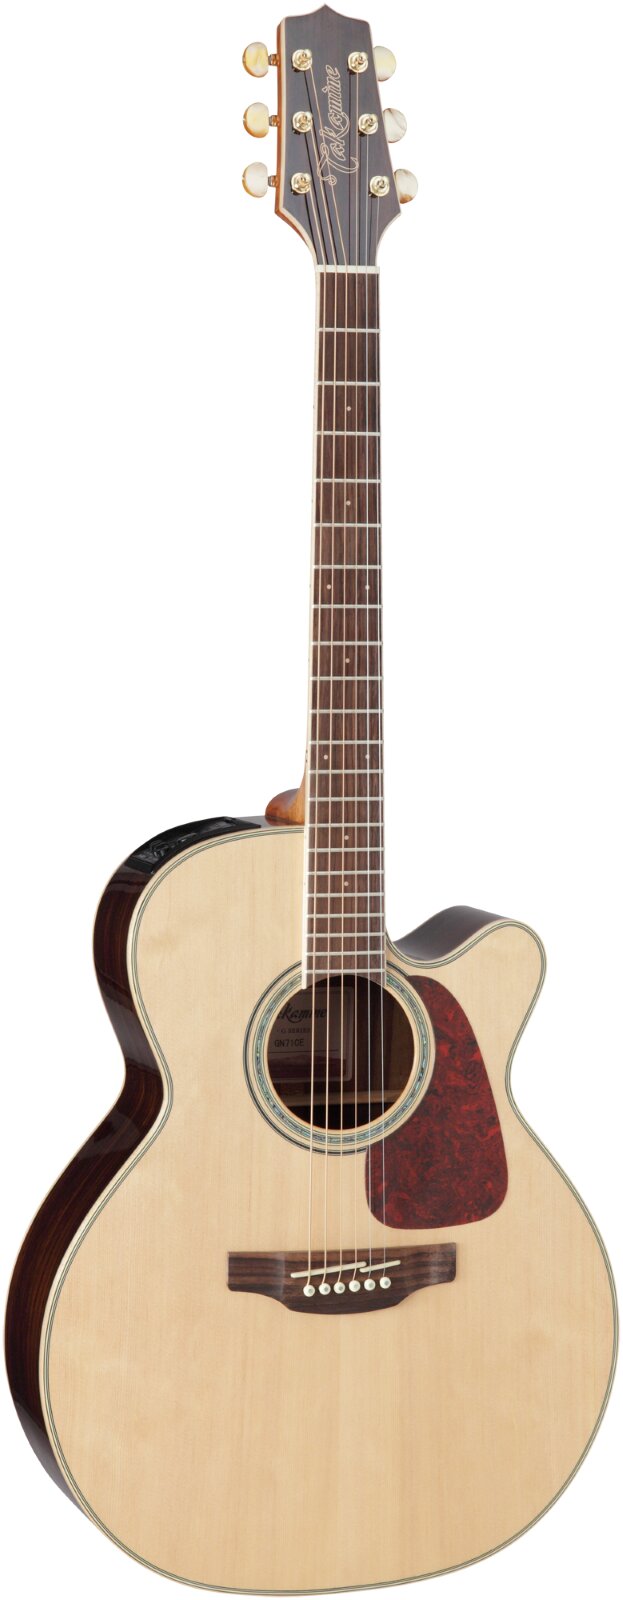 Takamine G Series, GN71CE, Natural : photo 1